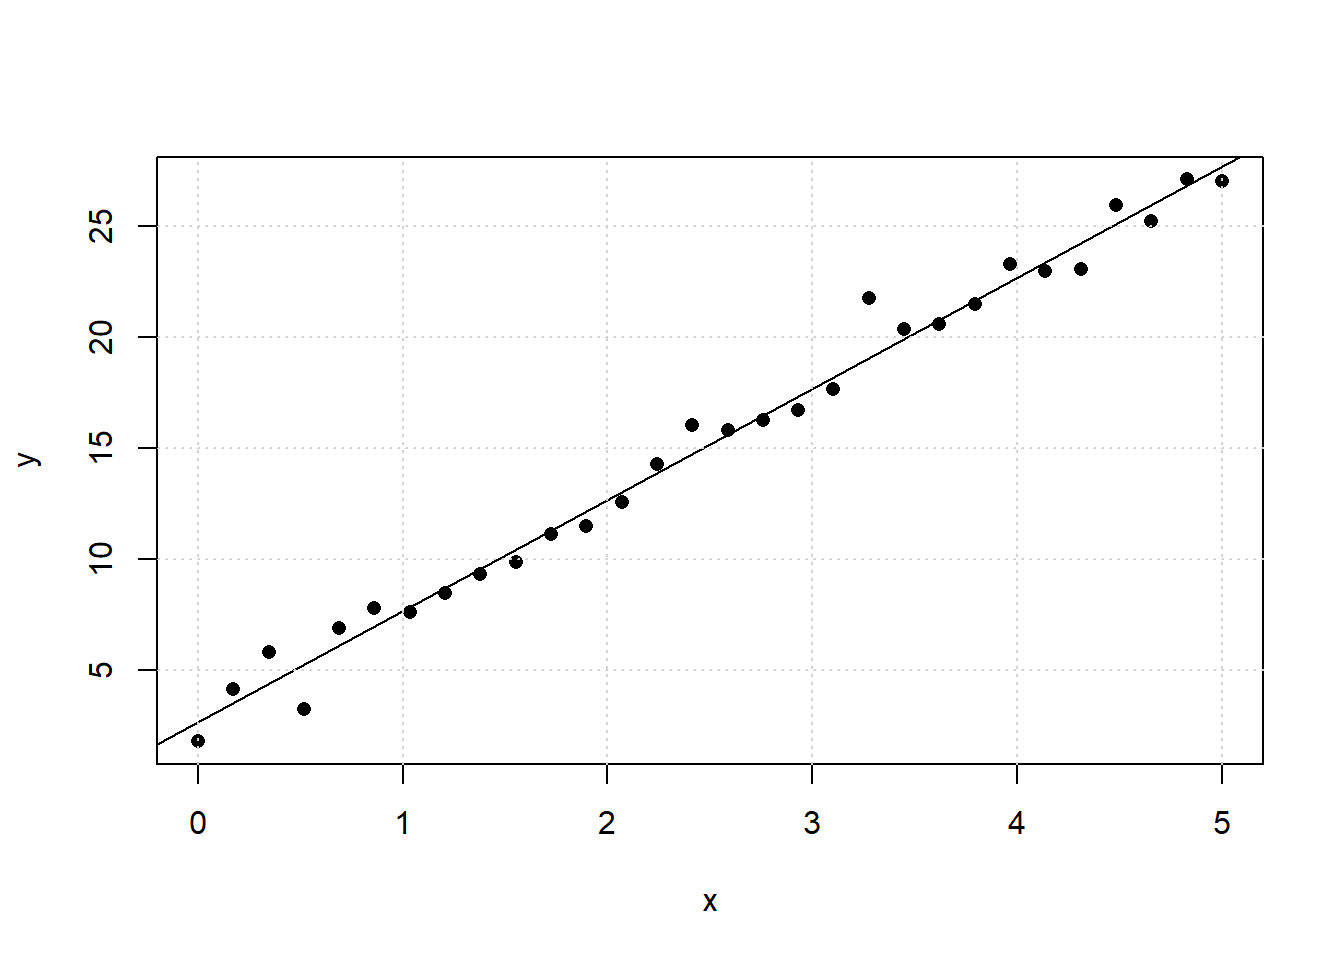 Simple scatter plot generated from the underlying function y = 3 + 5*x + N(0,1)